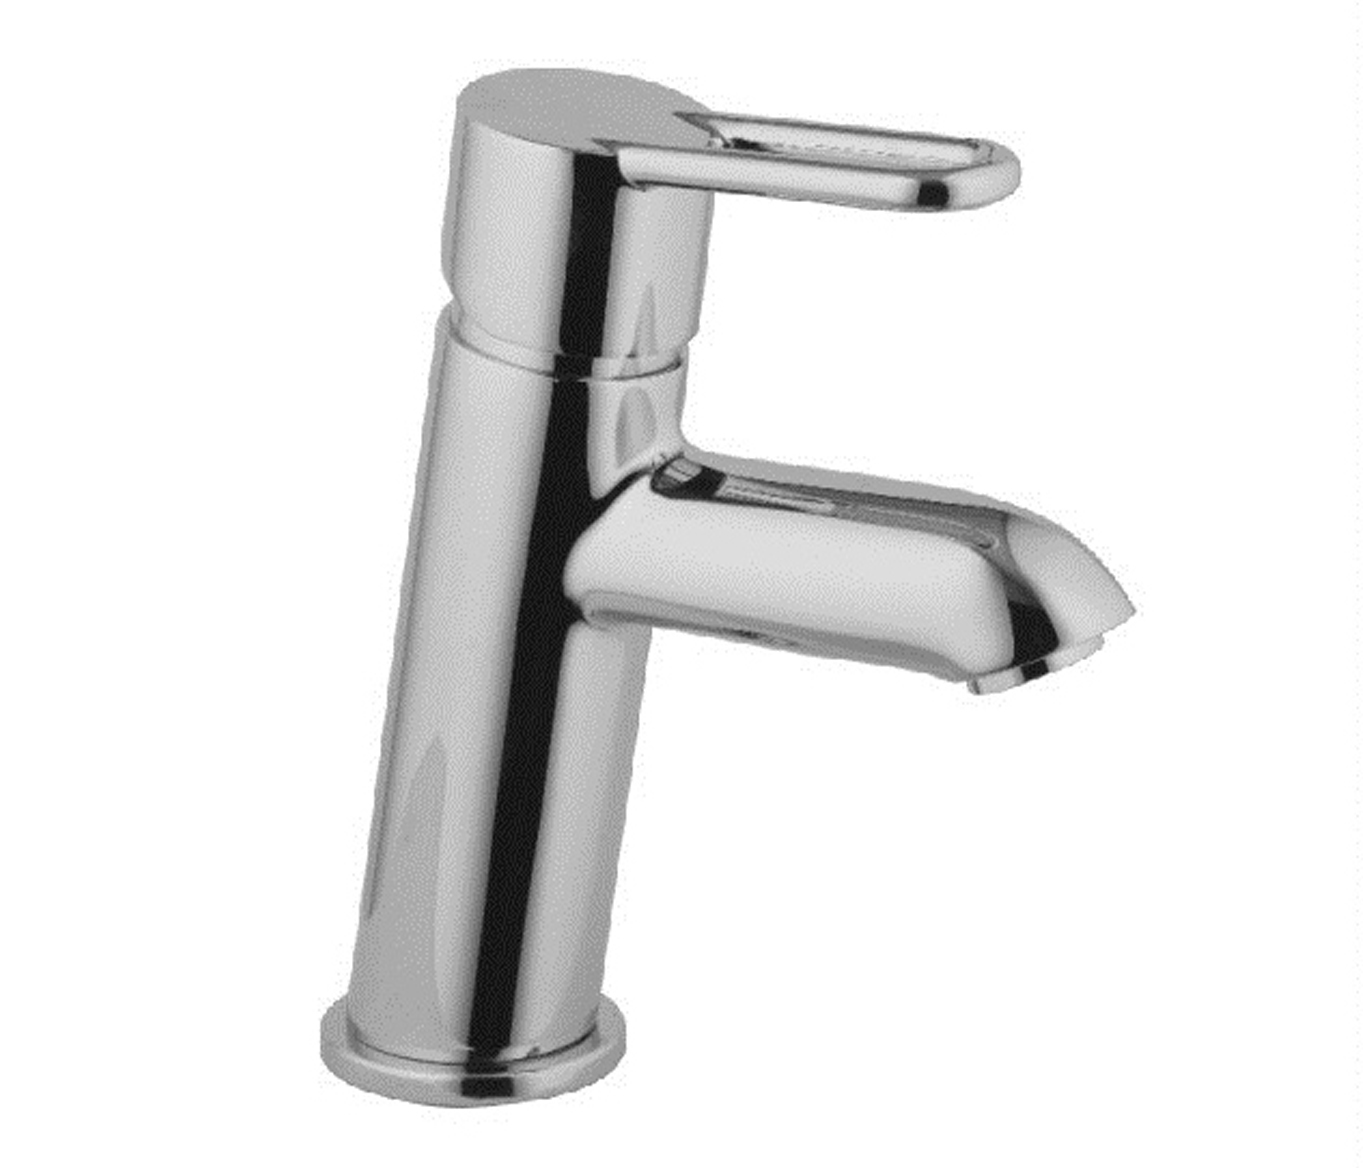 Nuvola single lever basin mixer without pop up waste, LP 0.2